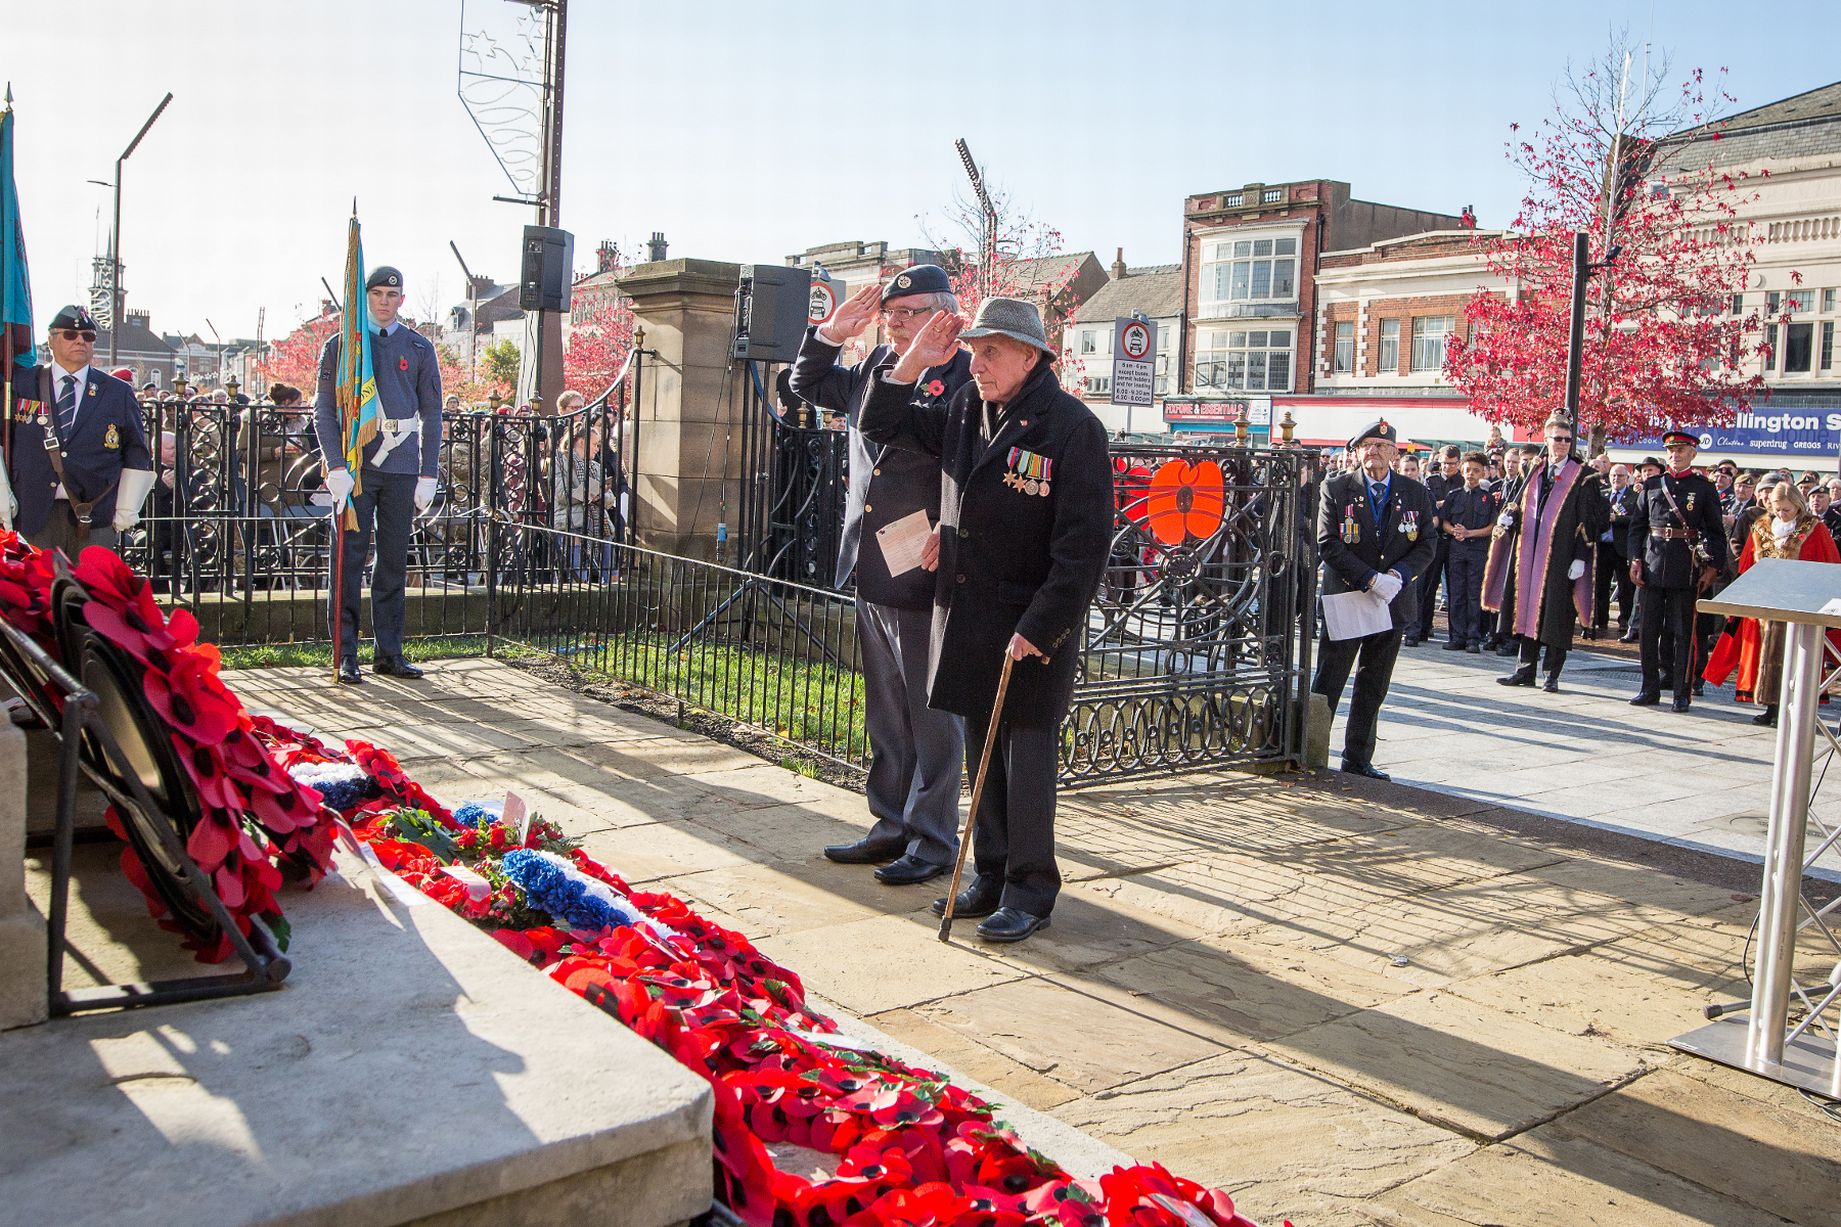 Image shows RAF Veteran and aviators saluting a memorial laid with poppy wreaths during a Remembrance Service.